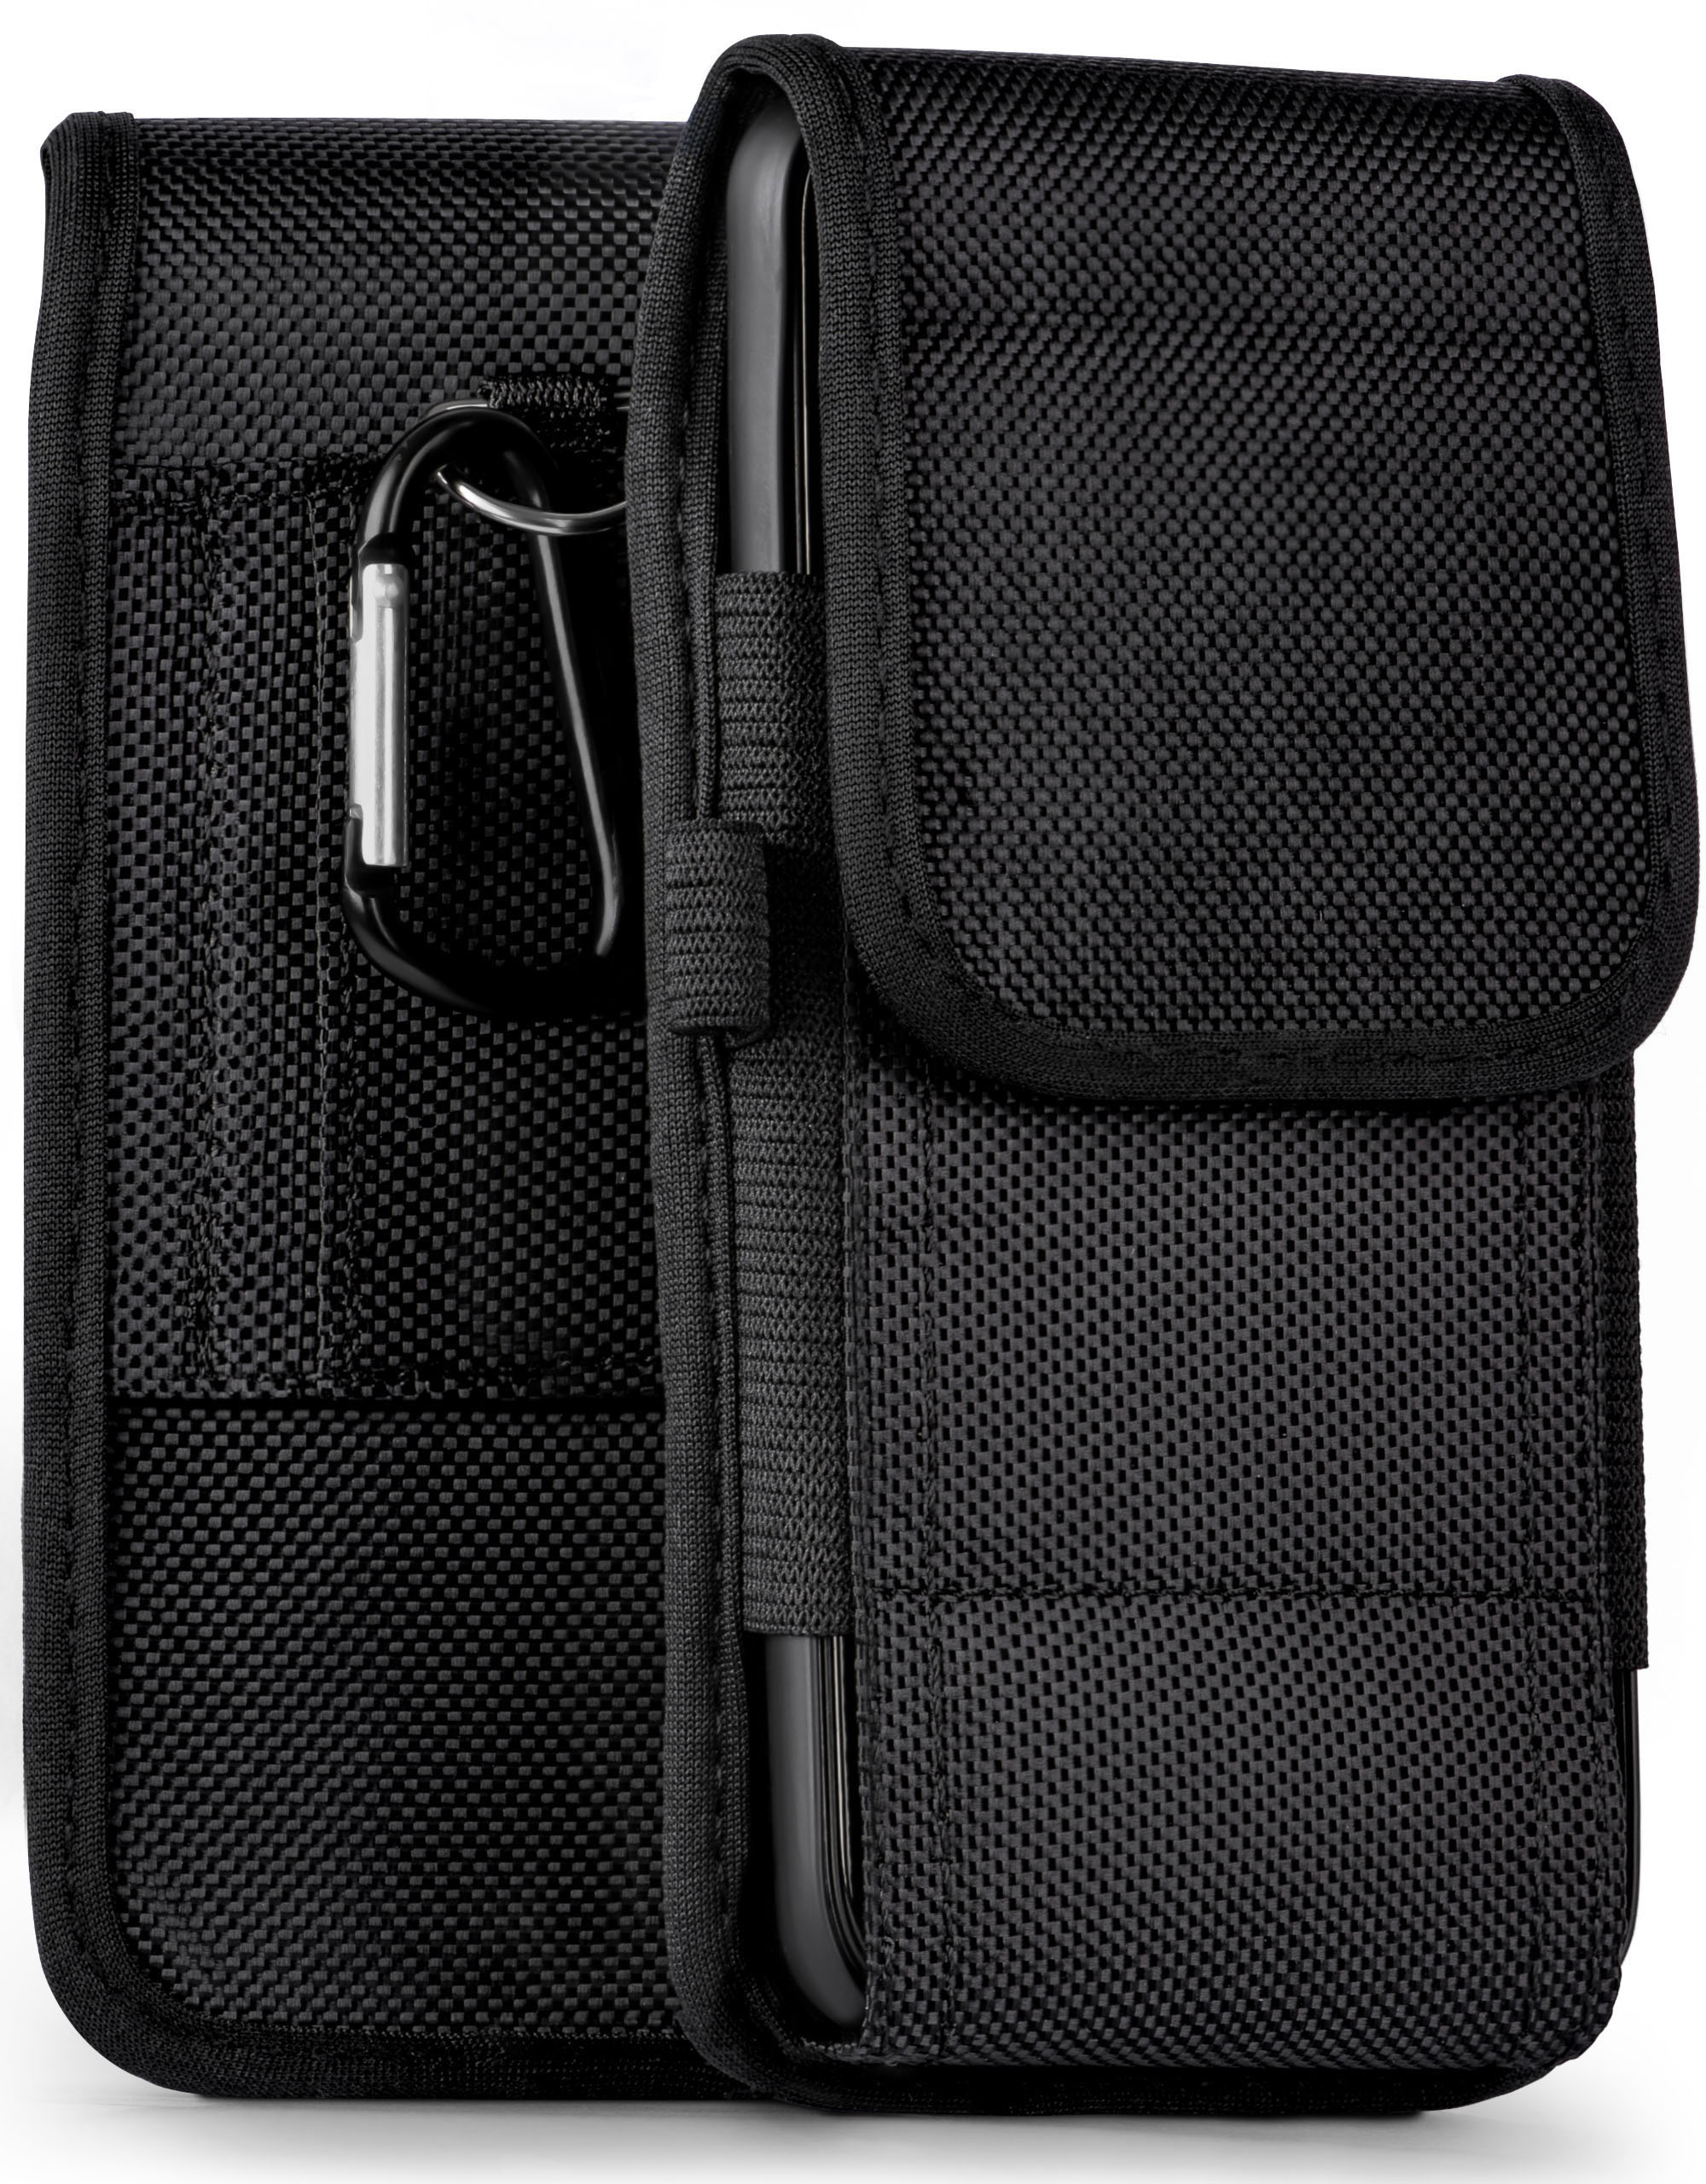 Trail MOEX Z, Case, P Holster, Huawei, Agility smart